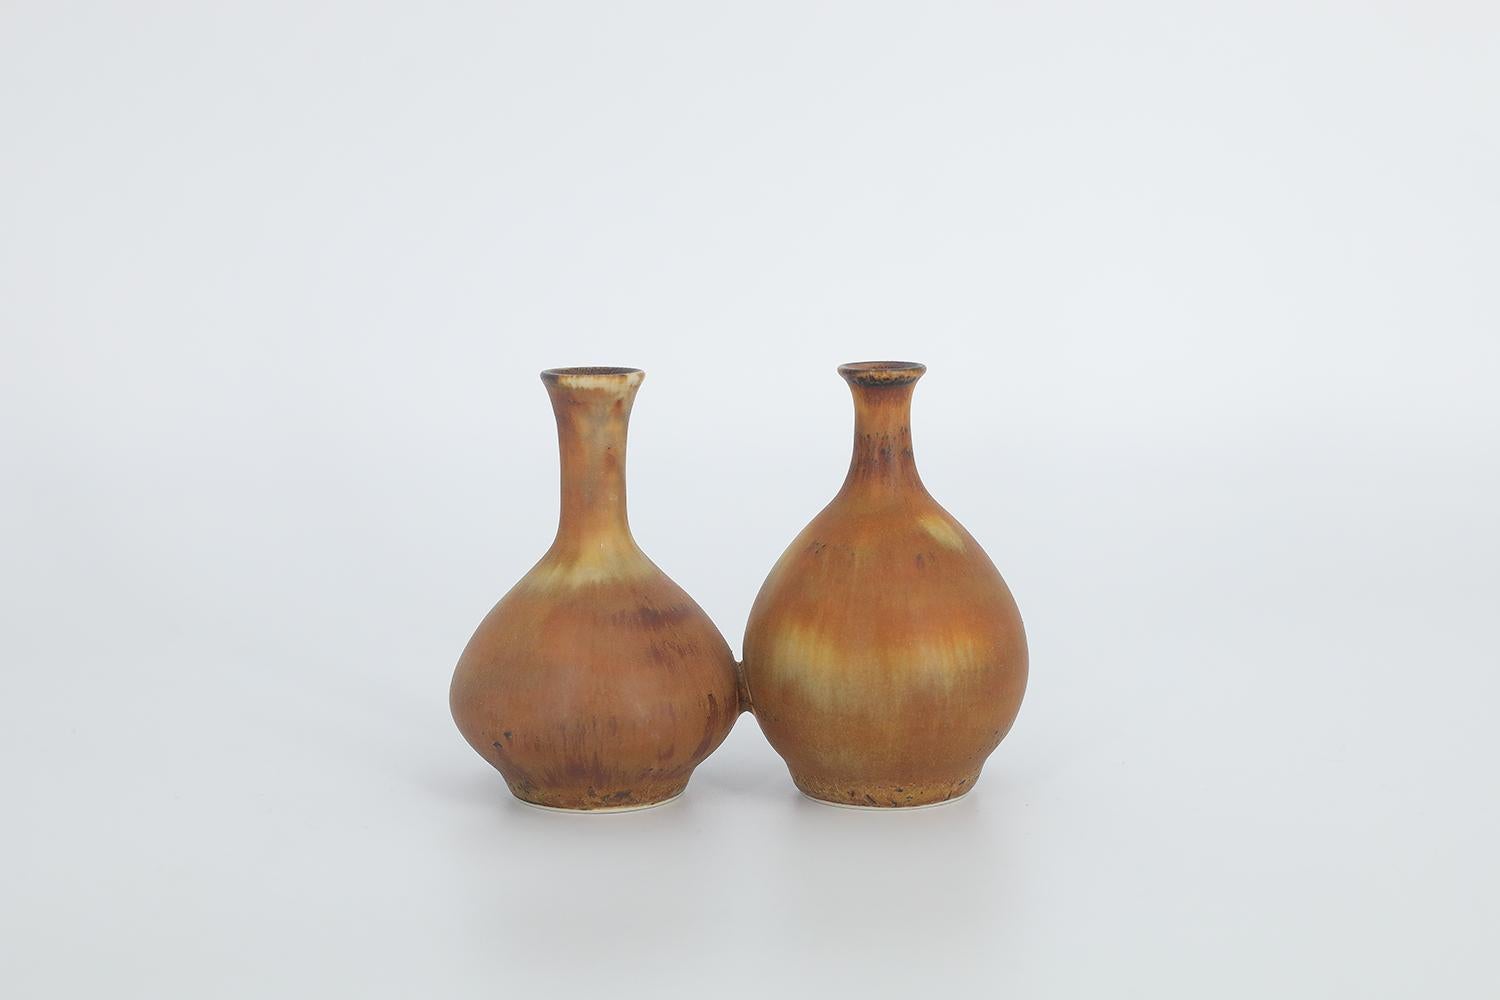 This miniature, collectible stoneware vase was designed by Gunnar Borg for the Swedish manufacture Höganäs Keramik during the 1960s. Handmade by a Master, with the utmost care and attention to details. Two vases forming a unity, colored in an